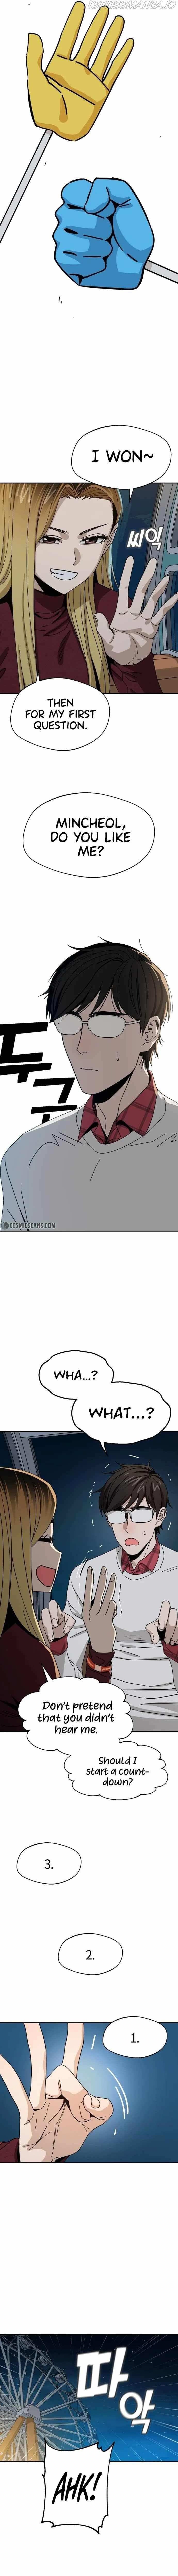 Match Made in Heaven by Chance chapter 36 - page 6